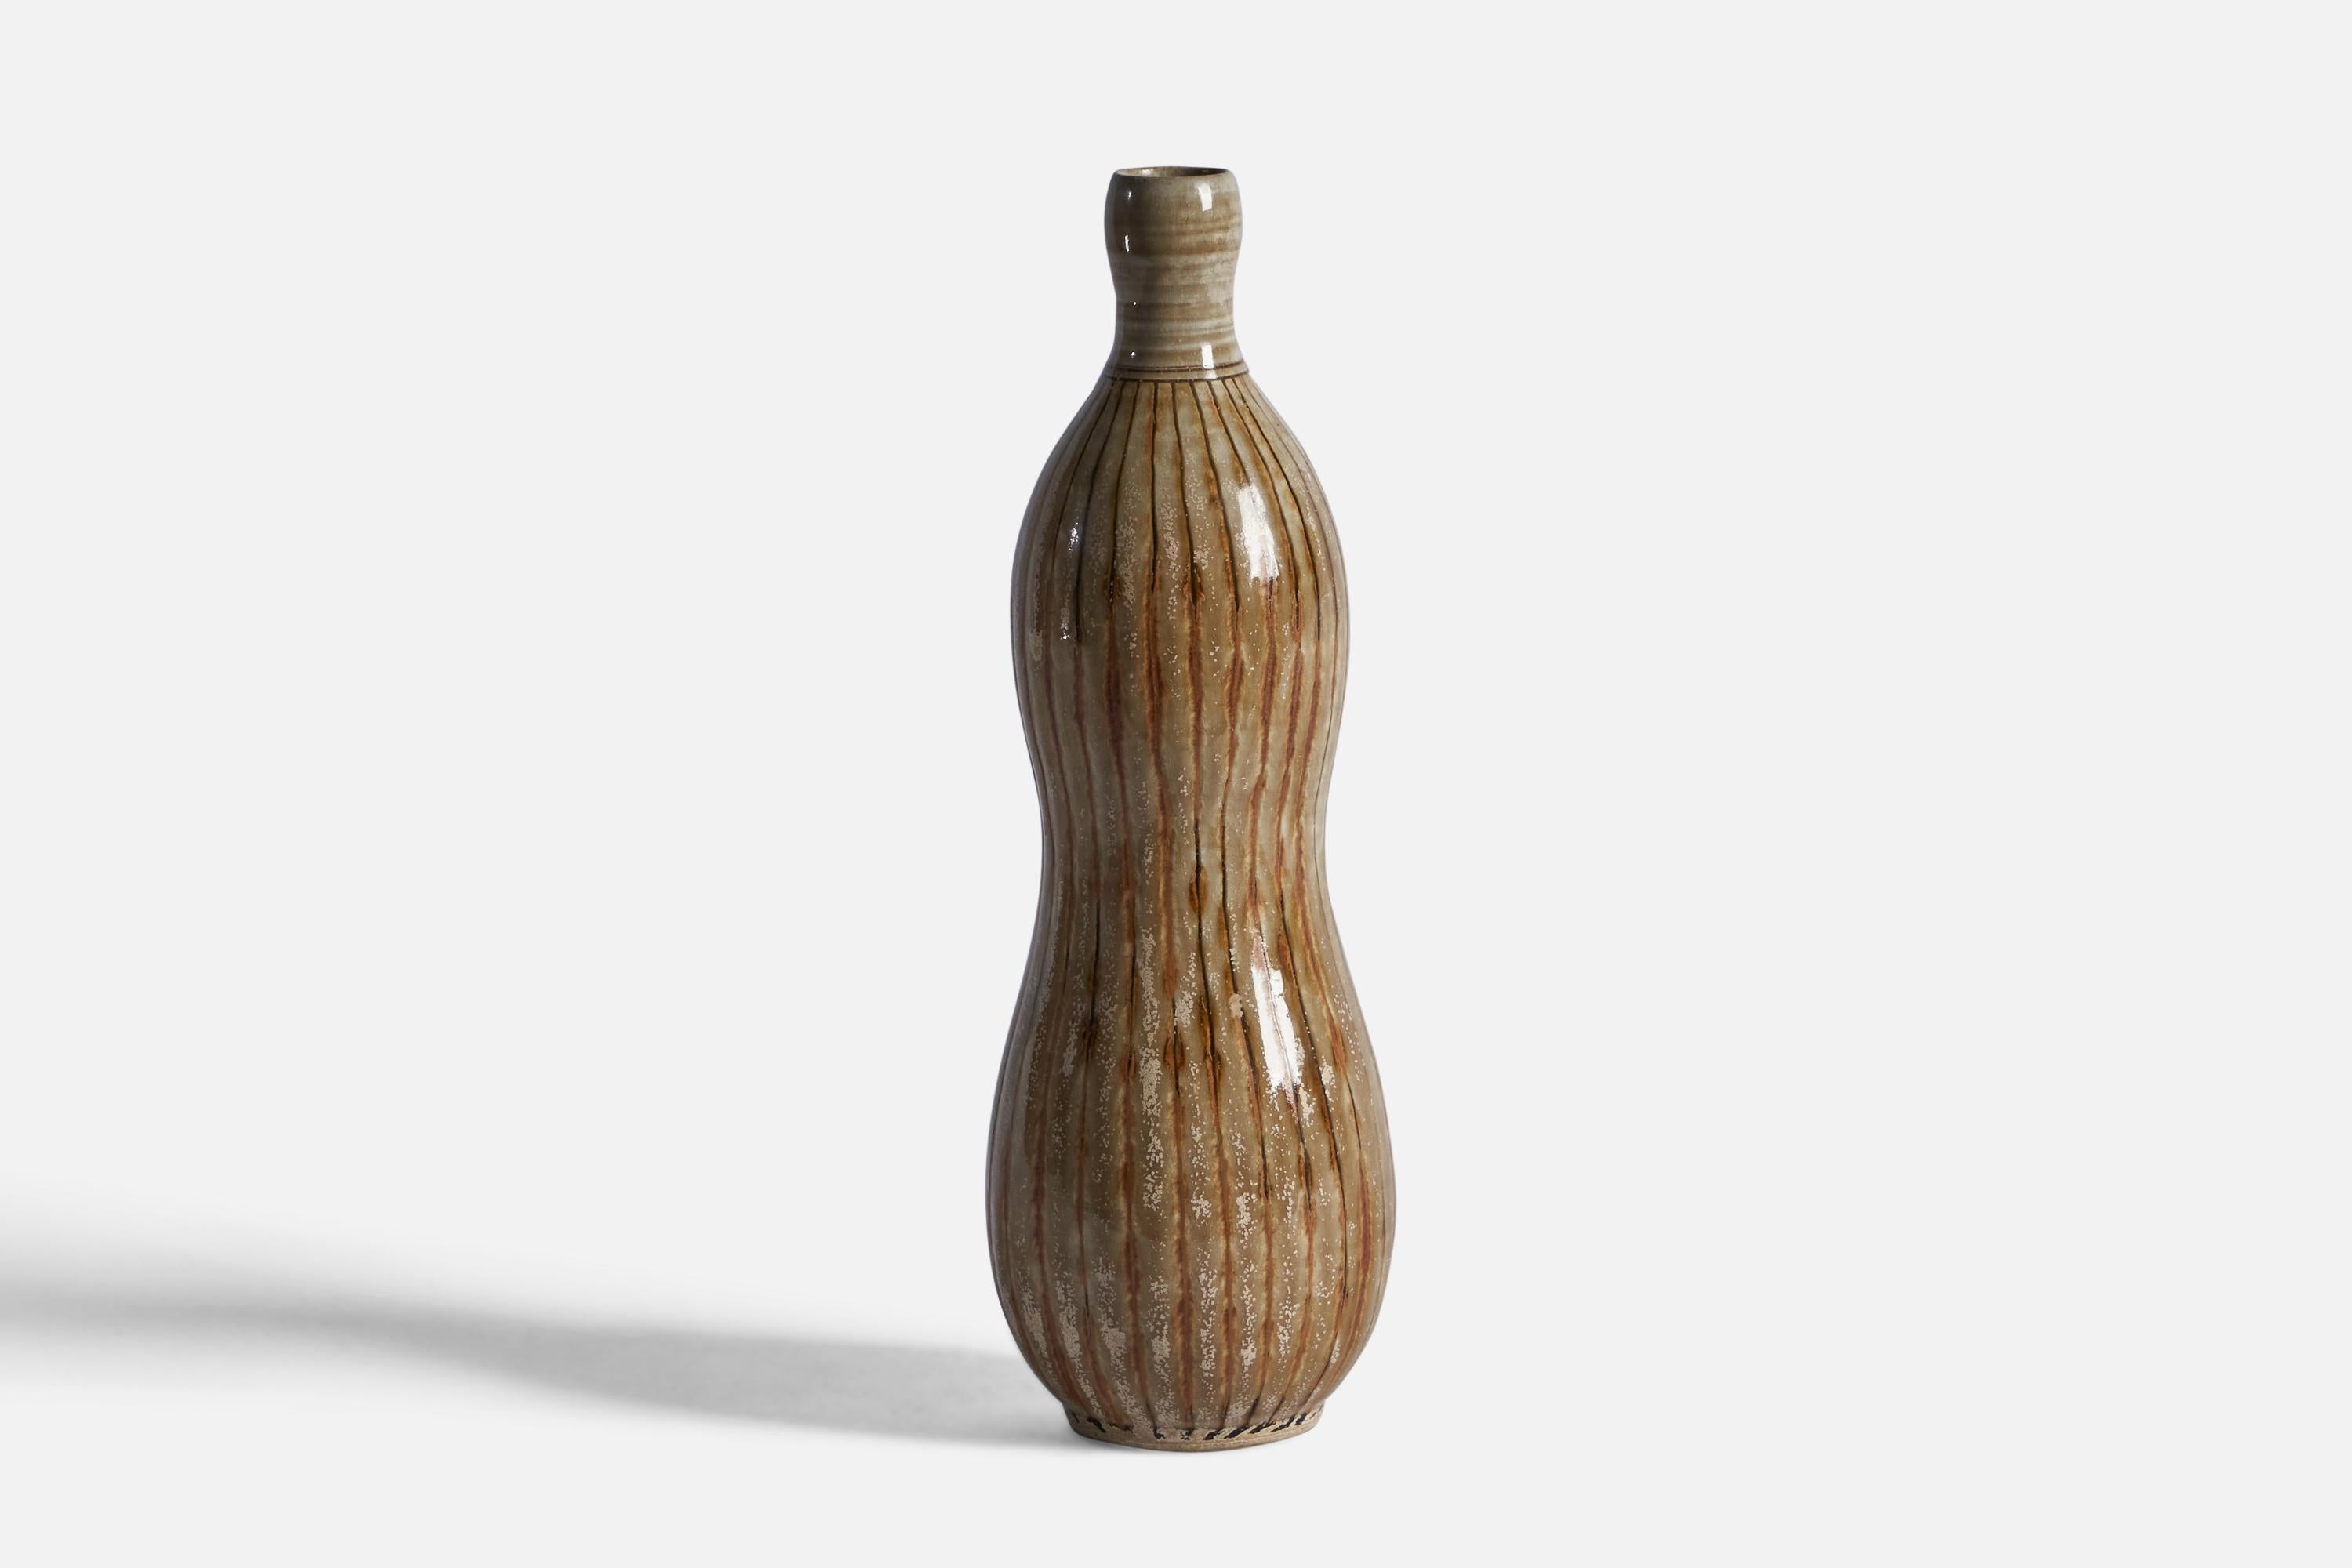 A beige and brown-glazed stoneware vase designed and produced by John Andersson, Höganäs, Sweden, c. 1950s.